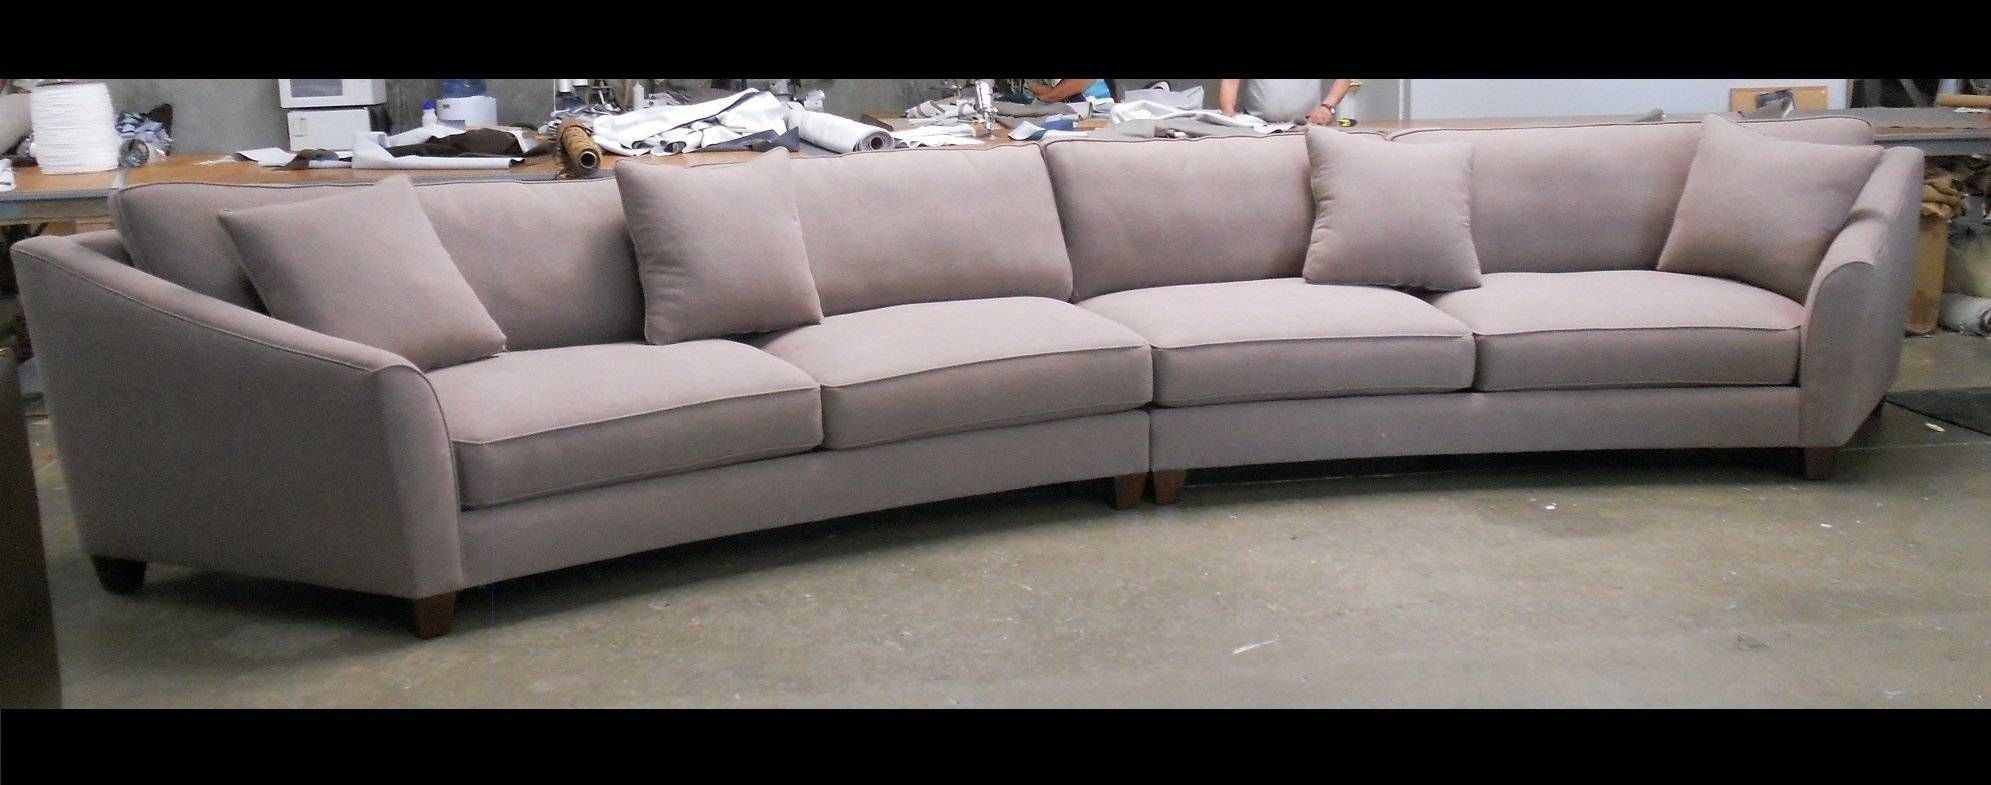 Curved Sectional Recliner Sofas – Cleanupflorida Throughout Curved Recliner Sofa (View 26 of 30)